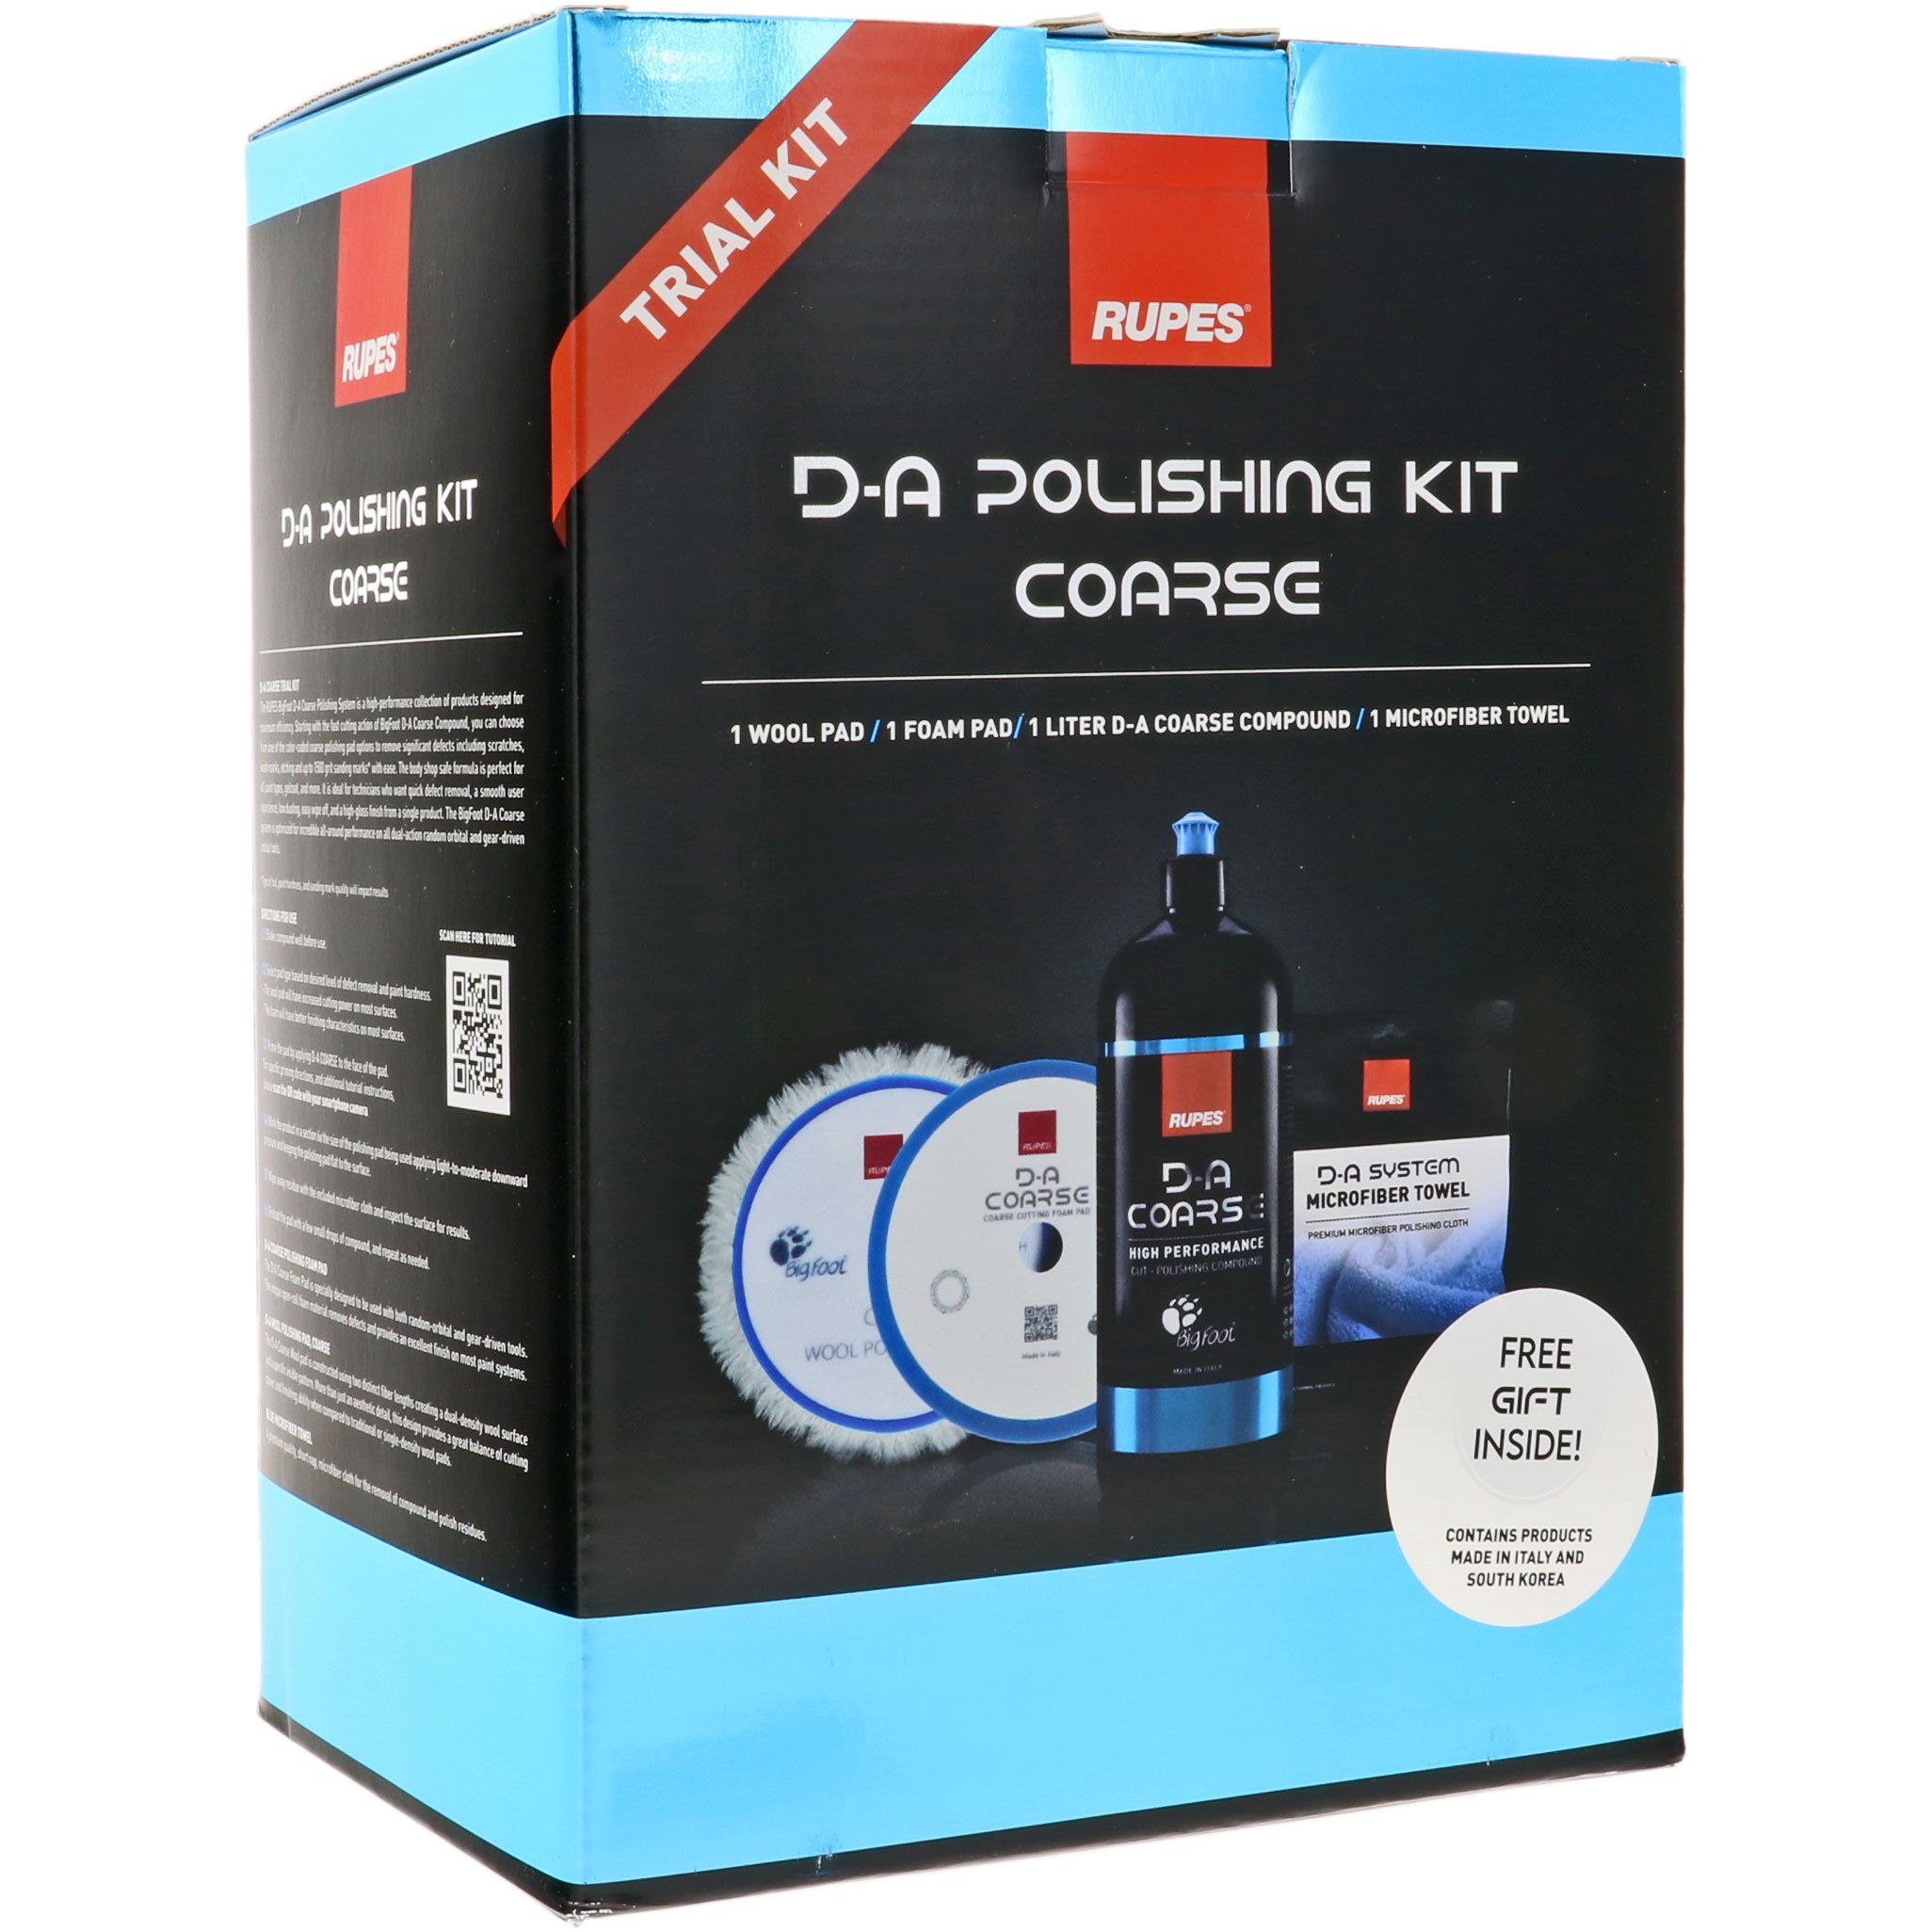 D-A Polishing Kit Coarse voor LHR21